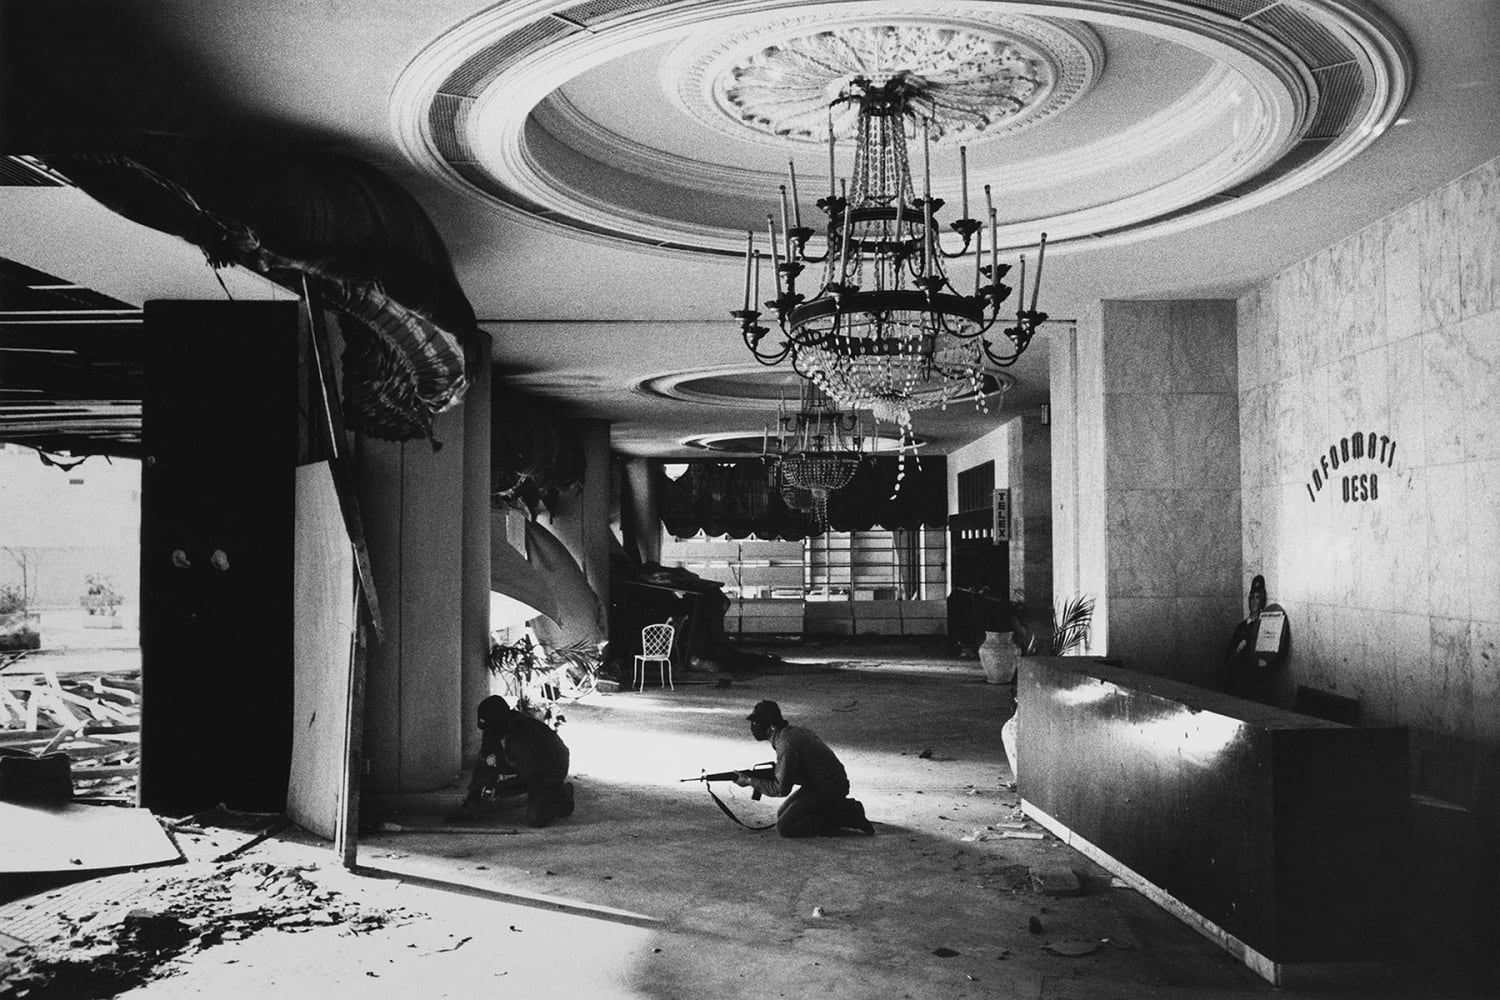 Christian gunmen in the foyer of the Holiday Inn in downtown Beirut, battling with Palestinians in the adjacent hotel during the Lebanese Civil War, 1976